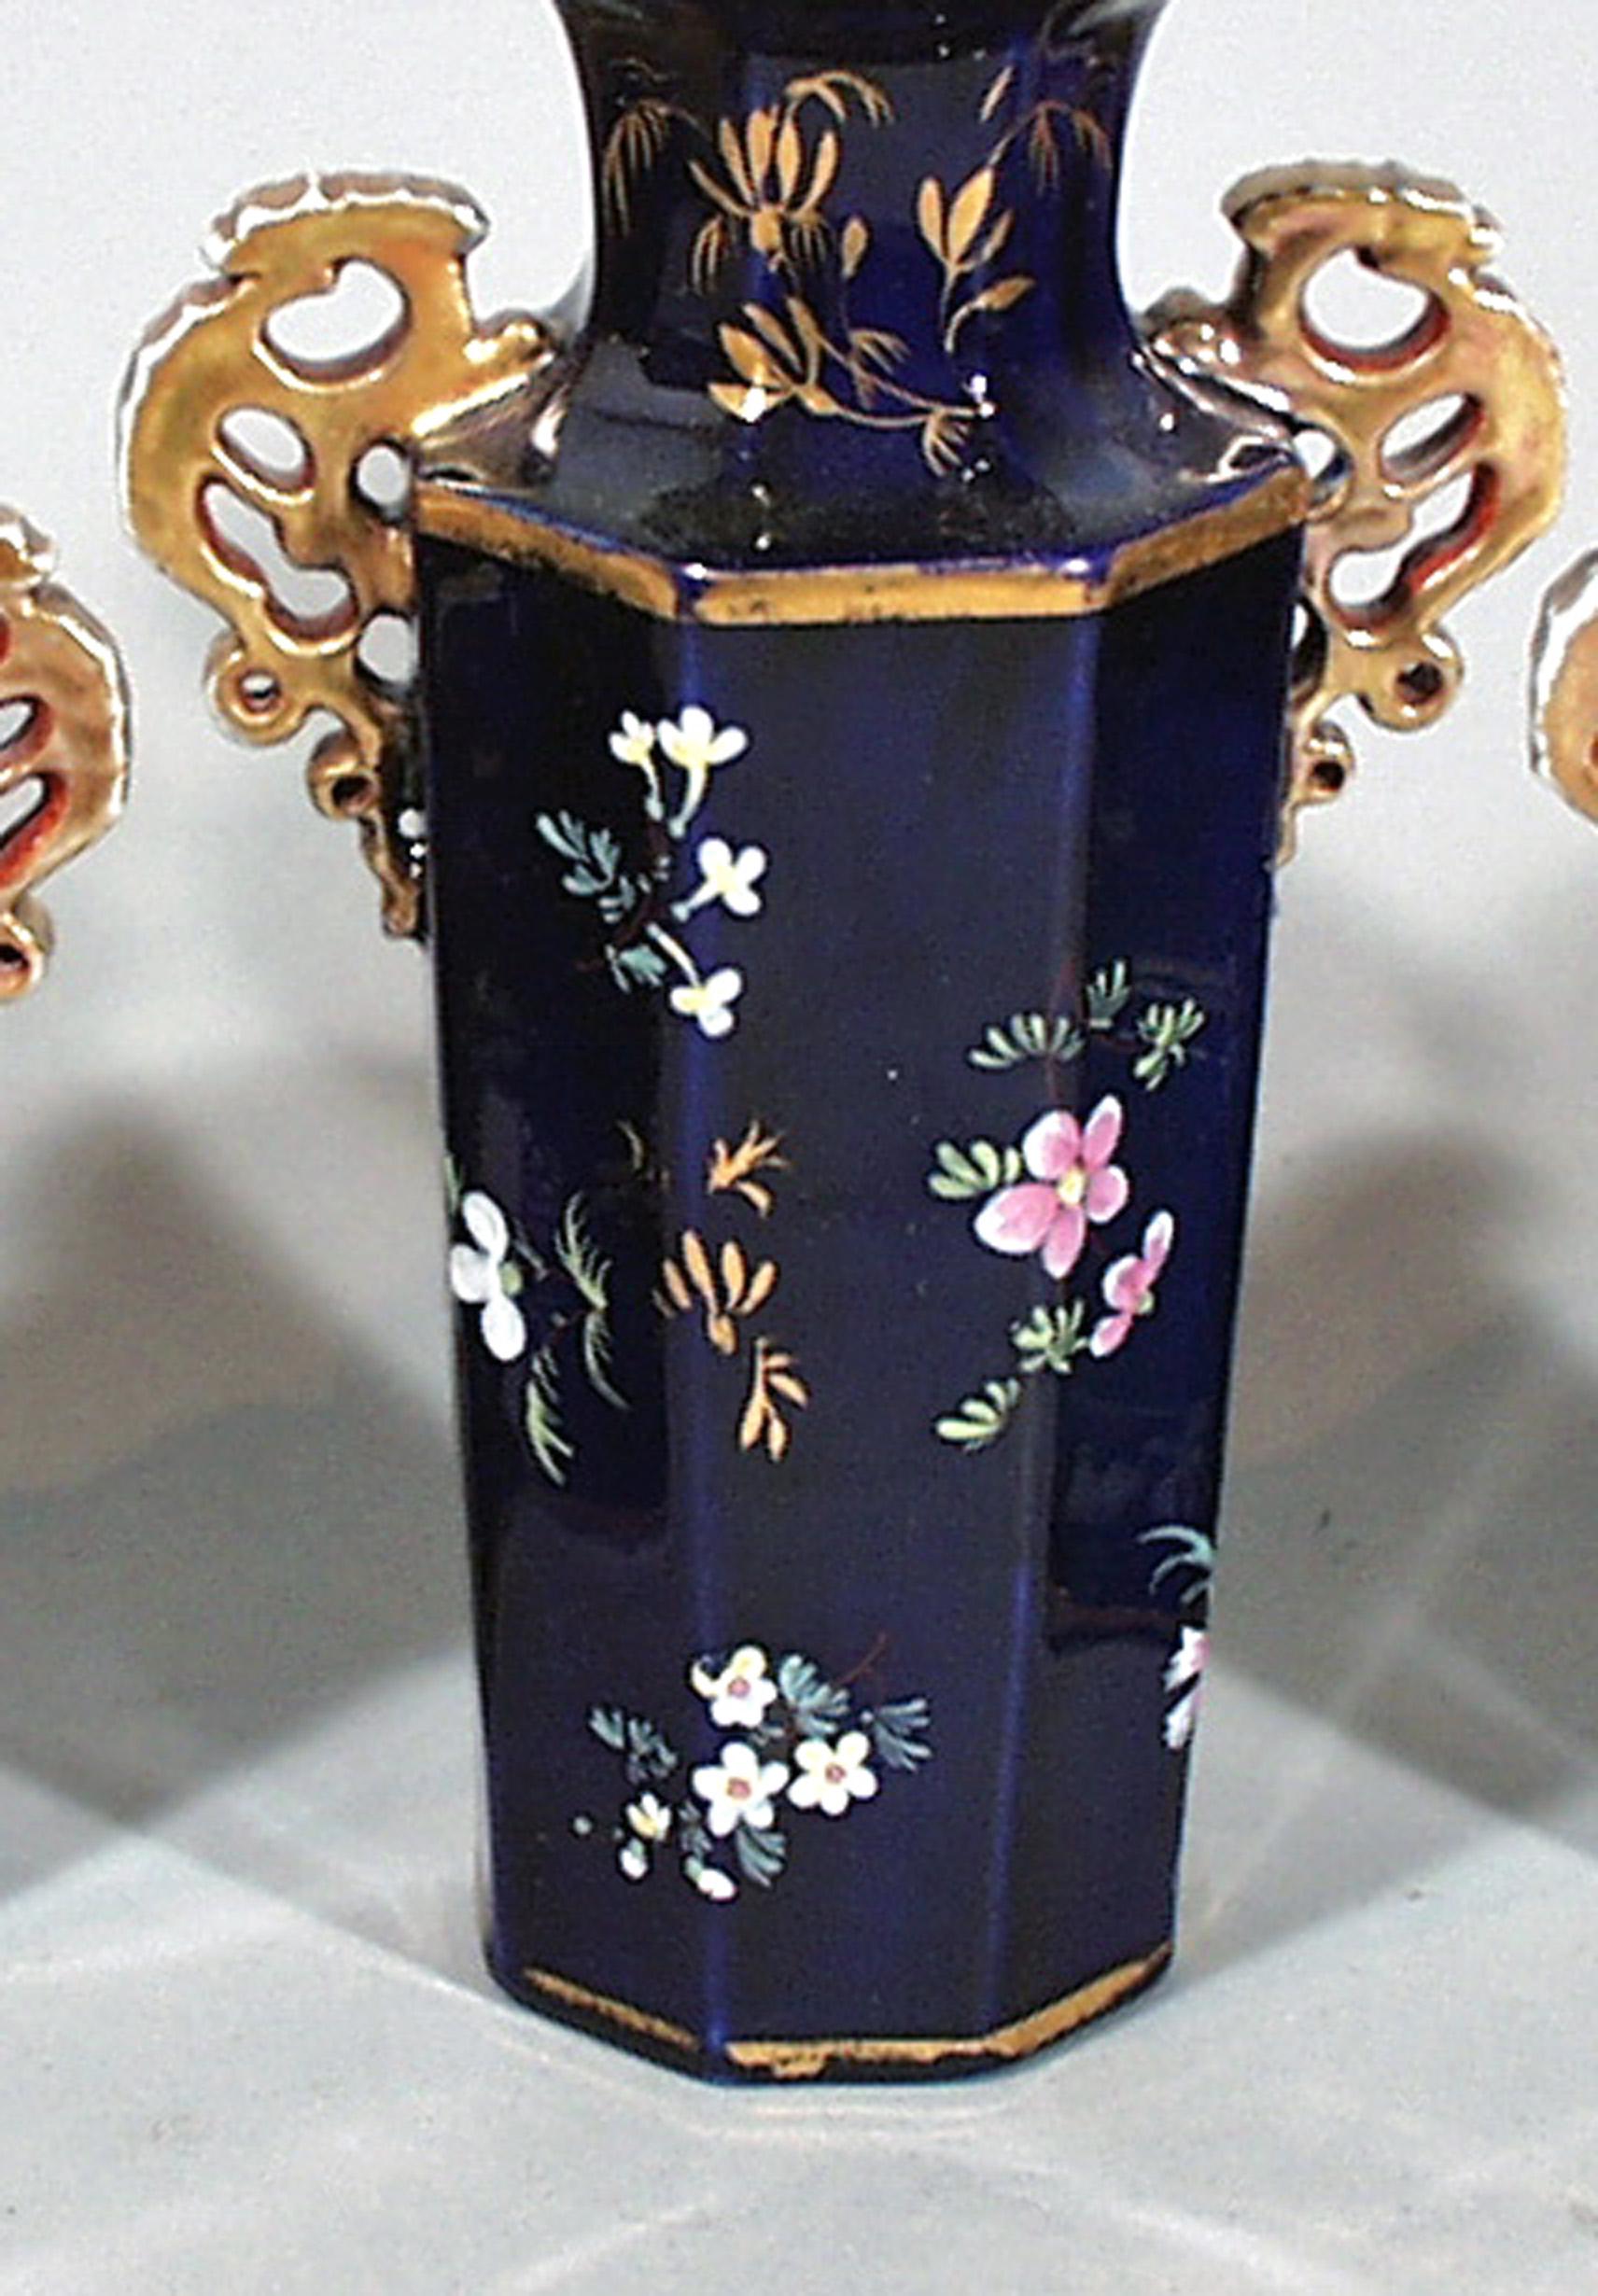 Mason's Ironstone Garniture of Three vases,
circa 1835

The three hexagonal-shaped vases are painted with polychrome flowers on a mazarine blue ground. The open-work handles, rim and feet are gilded.

Dimensions: Height 7 inches and 5 3/4